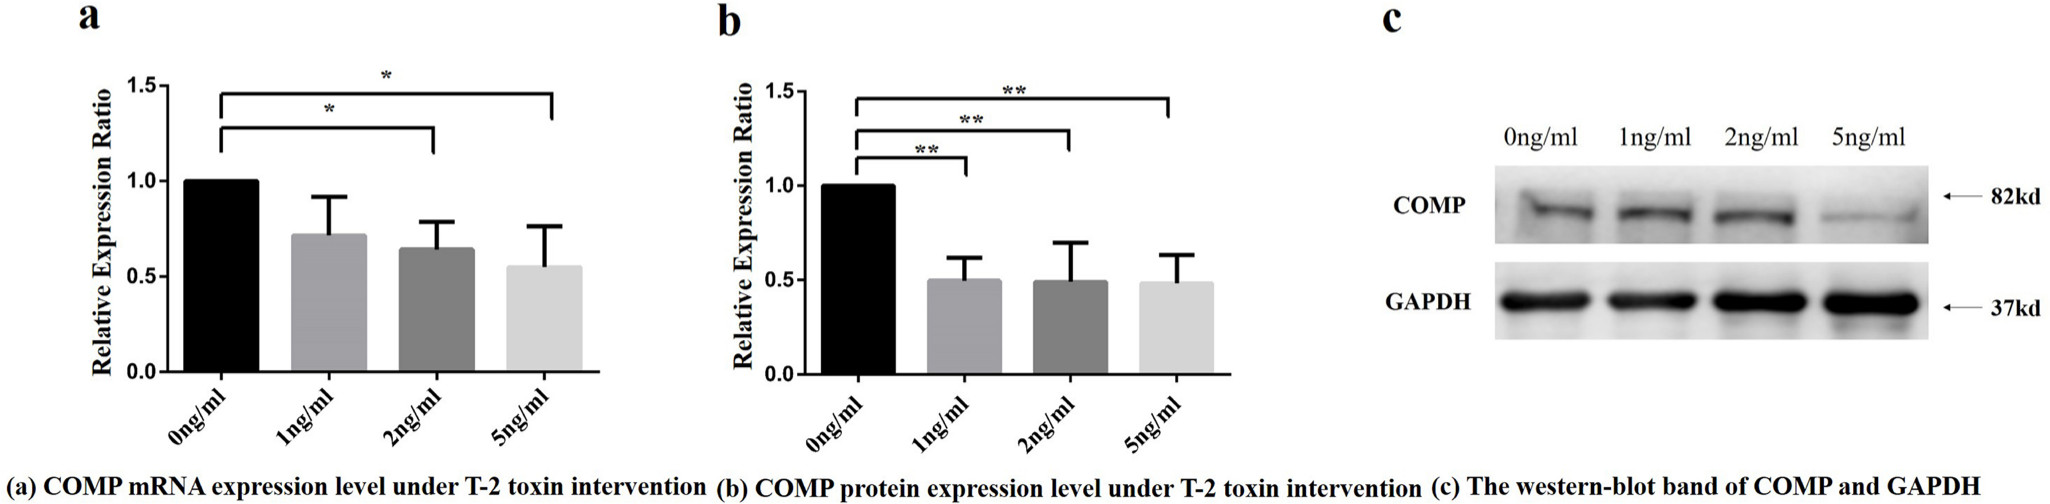 Fig. 2 
            Cartilage oligosaccharide matrix protein (COMP) messenger RNA (mRNA) and protein relative expression ratio under different concentrations of T-2 toxin intervention. a) COMP mRNA relative expression ratio under different concentrations of T-2 toxin intervention. Note: Compared with the control group, *p < 0.05. Using Dunnett-t test, 2 ng/ml and 5 ng/ml T-2 toxin concentration intervention group were statistically significant compared to 0 ng/ml toxin intervention group. b) COMP protein relative expression of integrated optical density (IOD) values under different T-2 toxin concentrations. Note: Using Dunnett-t test, the values in 1 ng/ml, 2 ng/ml, and 5 ng/ml T-2 toxin concentration intervention groups were found to be statistically significant compared with the 0 ng/ml toxin intervention group, respectively, **p < 0.01. c) The western blot band of COMP and reference protein in four groups with different T-2 toxin treatment concentrations. GADPH, glyceraldehyde-3-phosphate dehydrogenase.
          